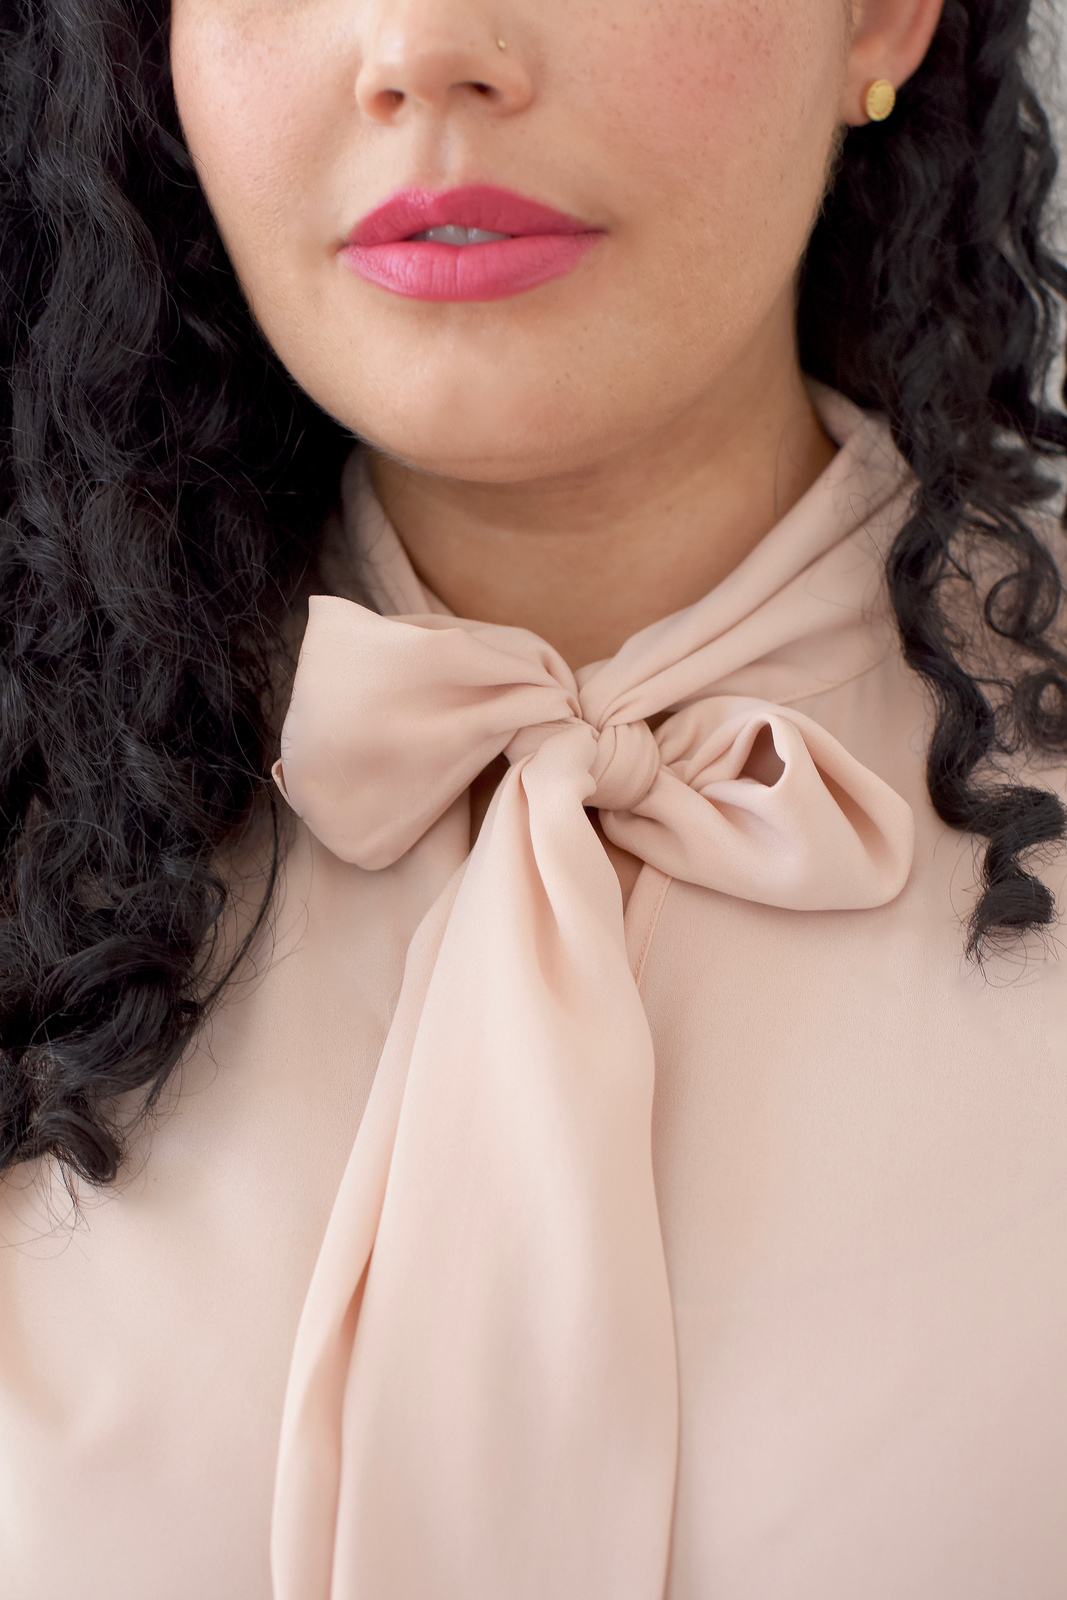 Tanesha Awasthi, also known as Girl With Curves, shares 1 of 3 ways to style a tie-neck blouse.